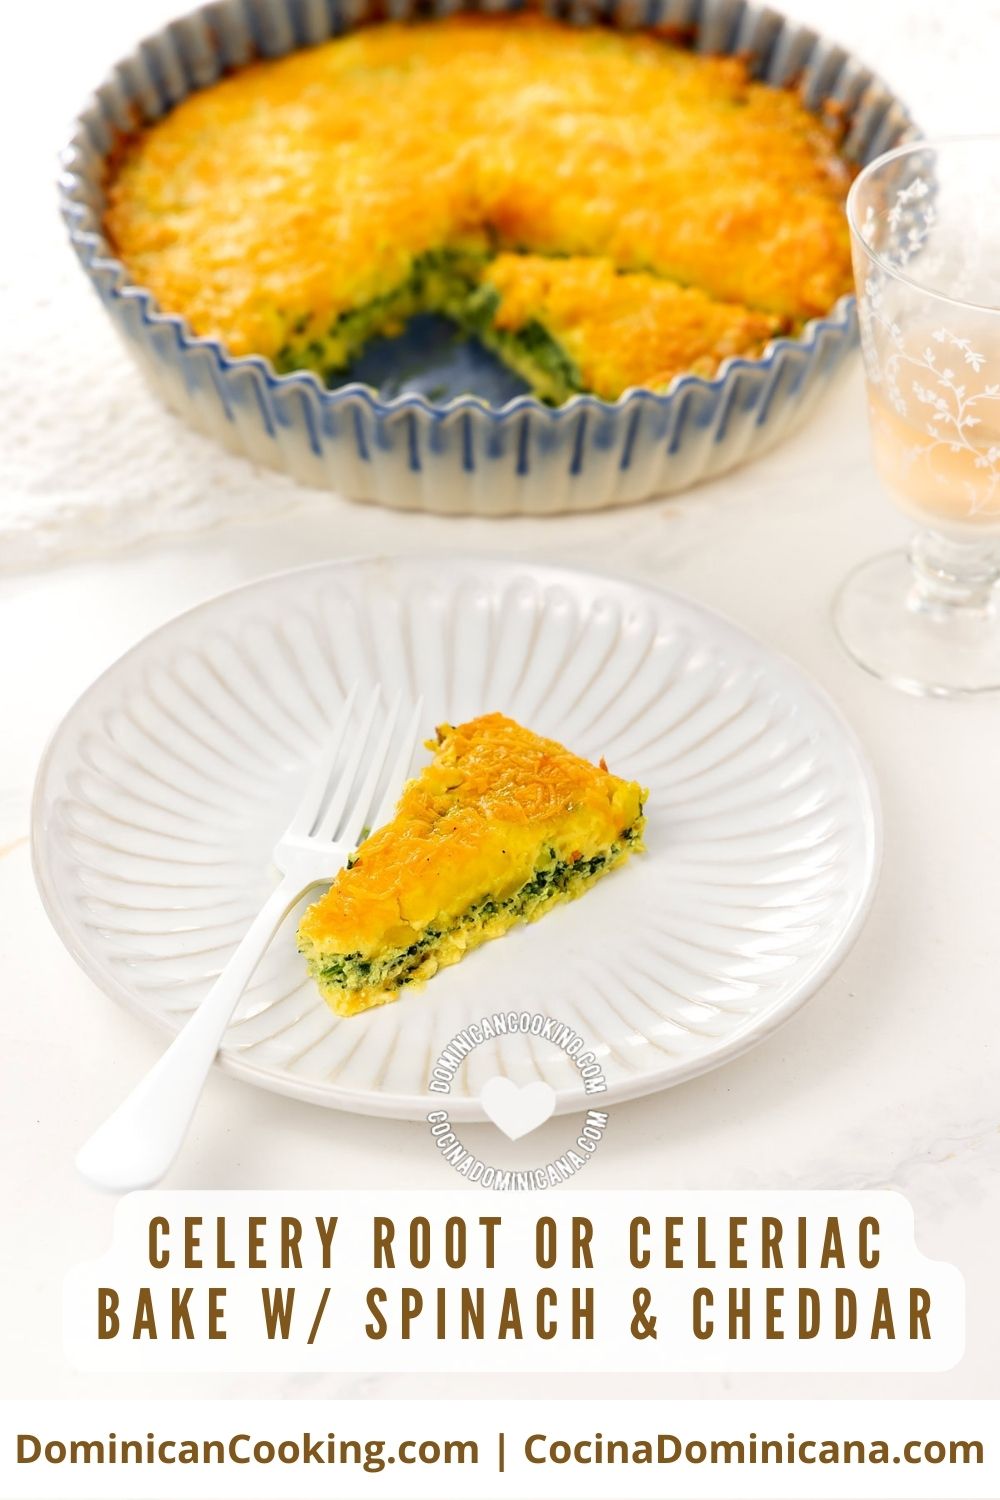 Celery root bake with spinach and cheddar recipe.